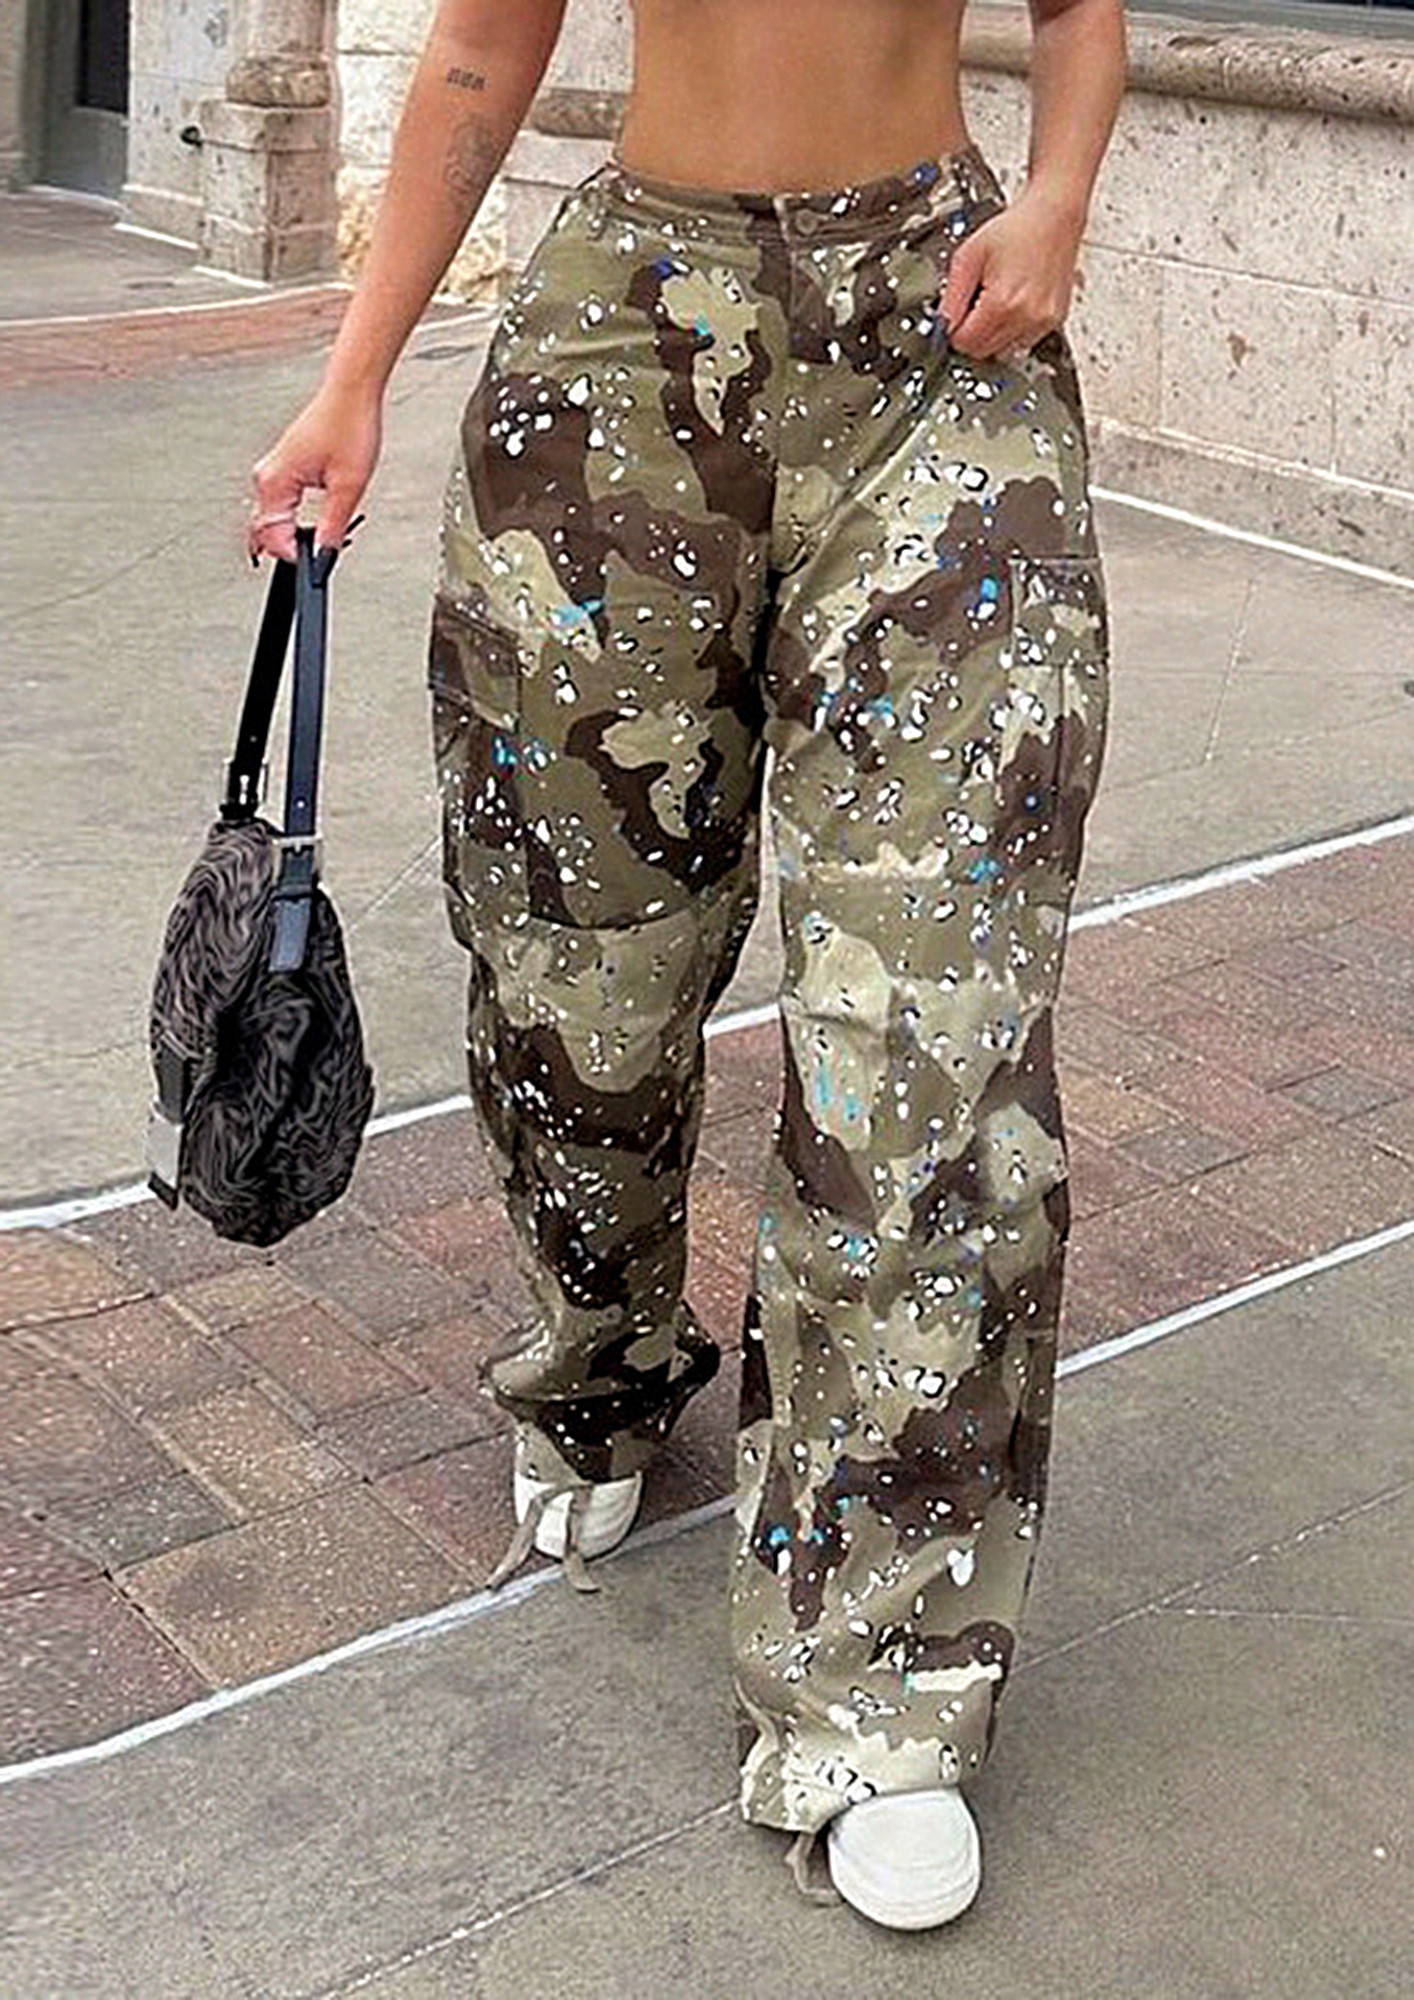 Buy Womens Cargo Work Pants Casual Military Camo Army Combat Trousers with  Pockets, Camo 169, 2 at Amazon.in